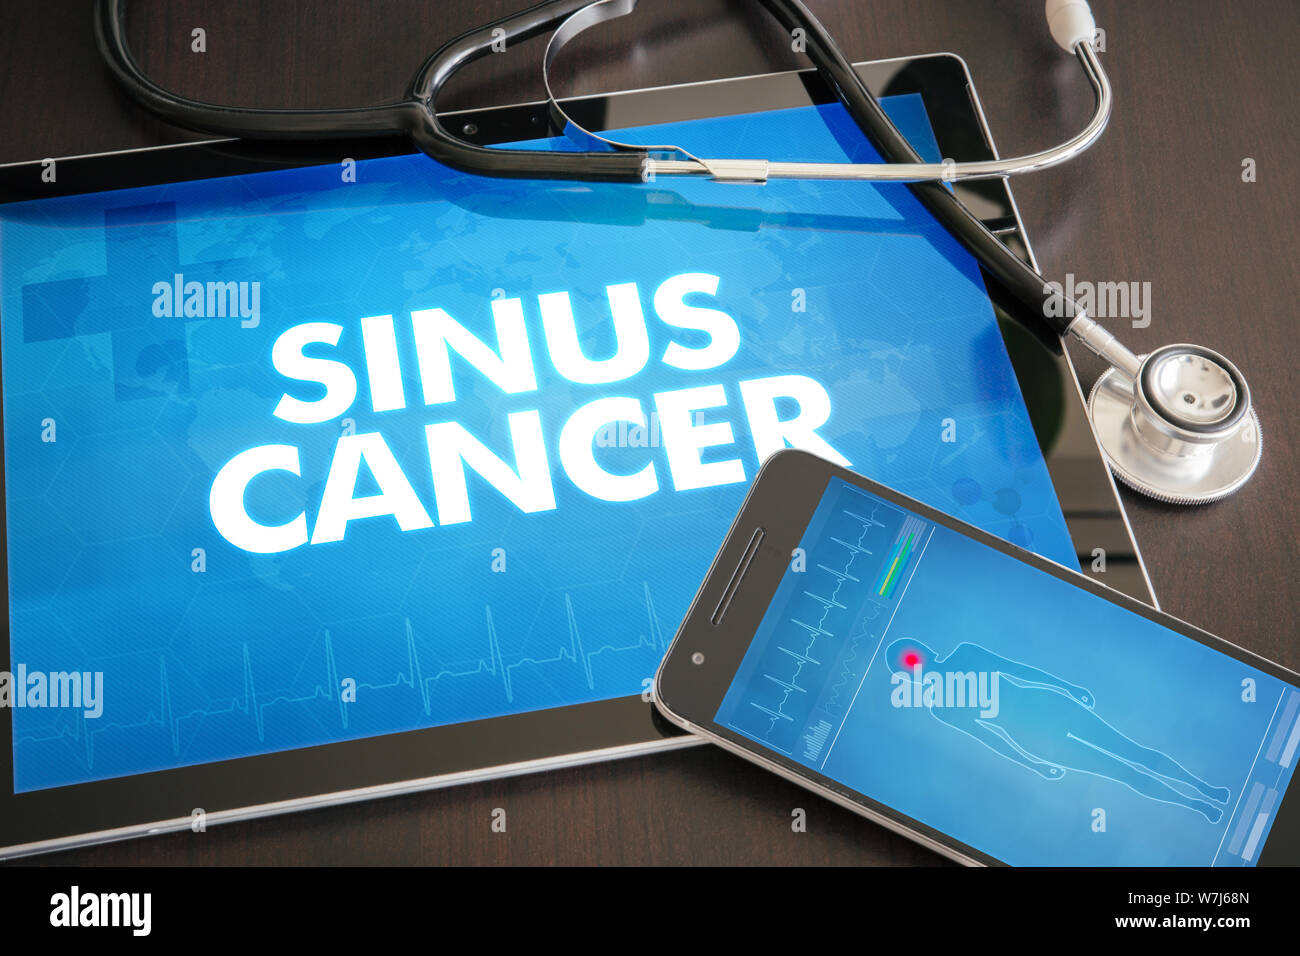 Sinus cancer (cancer type) diagnosis medical concept on tablet screen with stethoscope. Stock Photo